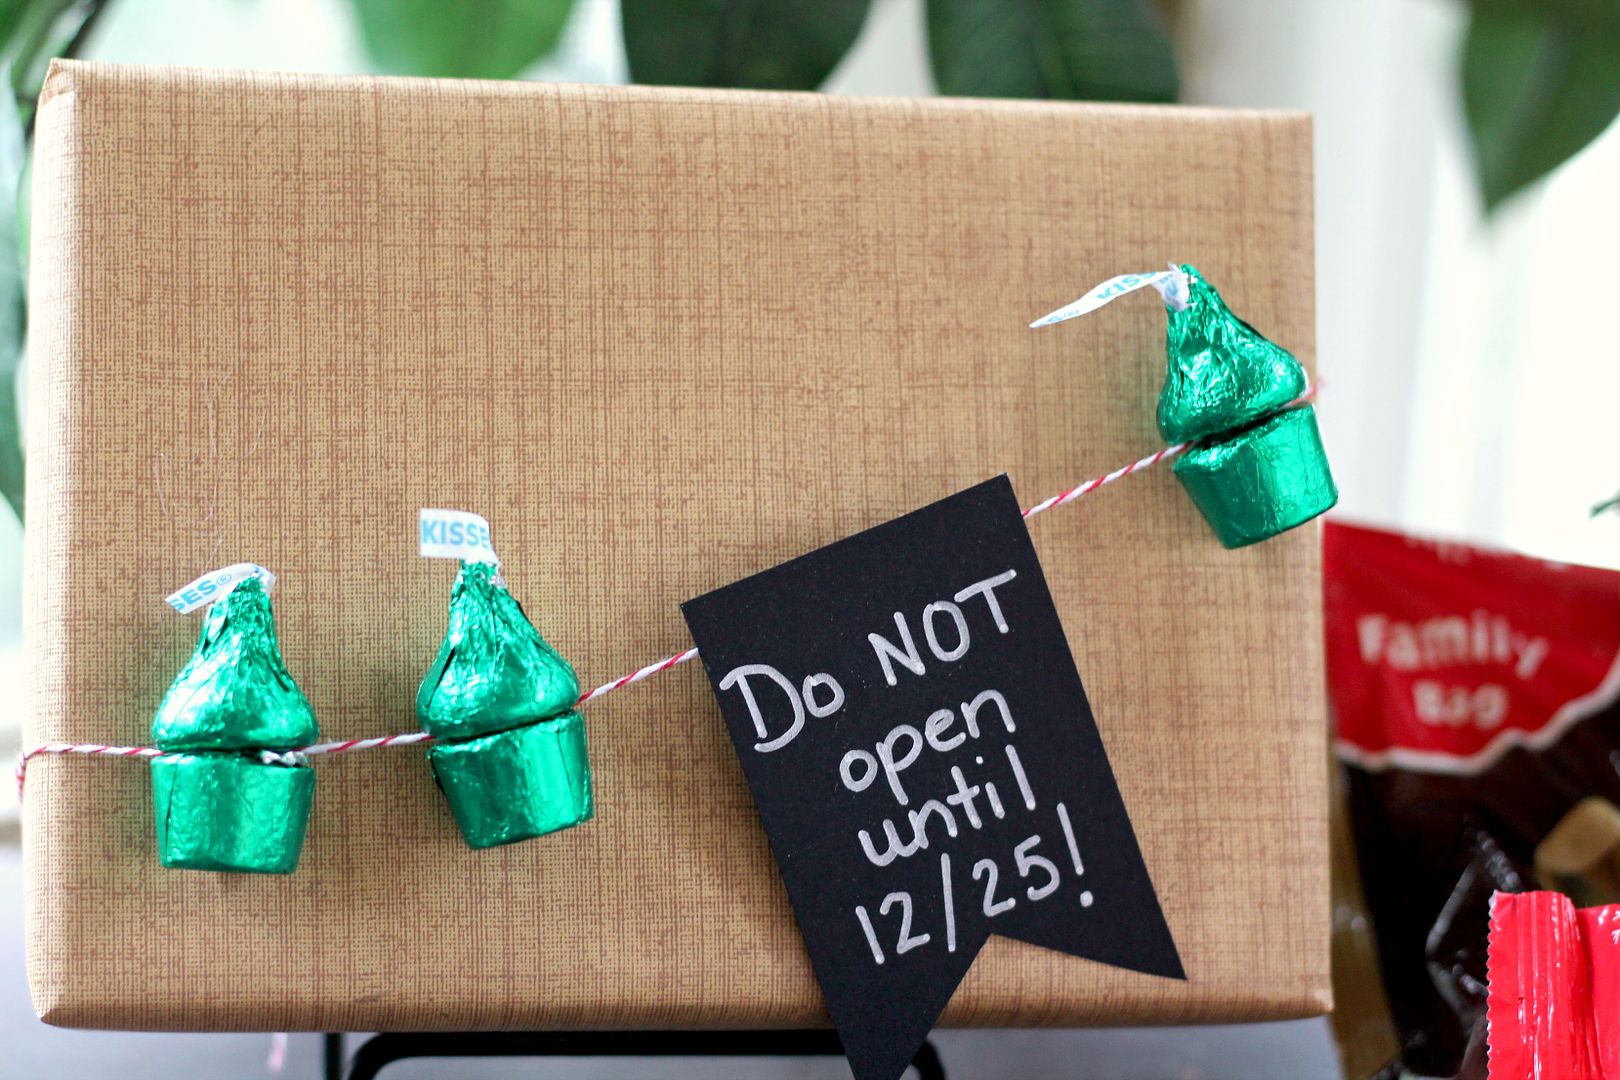 This is a great craft to do with kids! Use Hershey's kisses and Rolos to make a Christmas Tree garland! SO easy! 